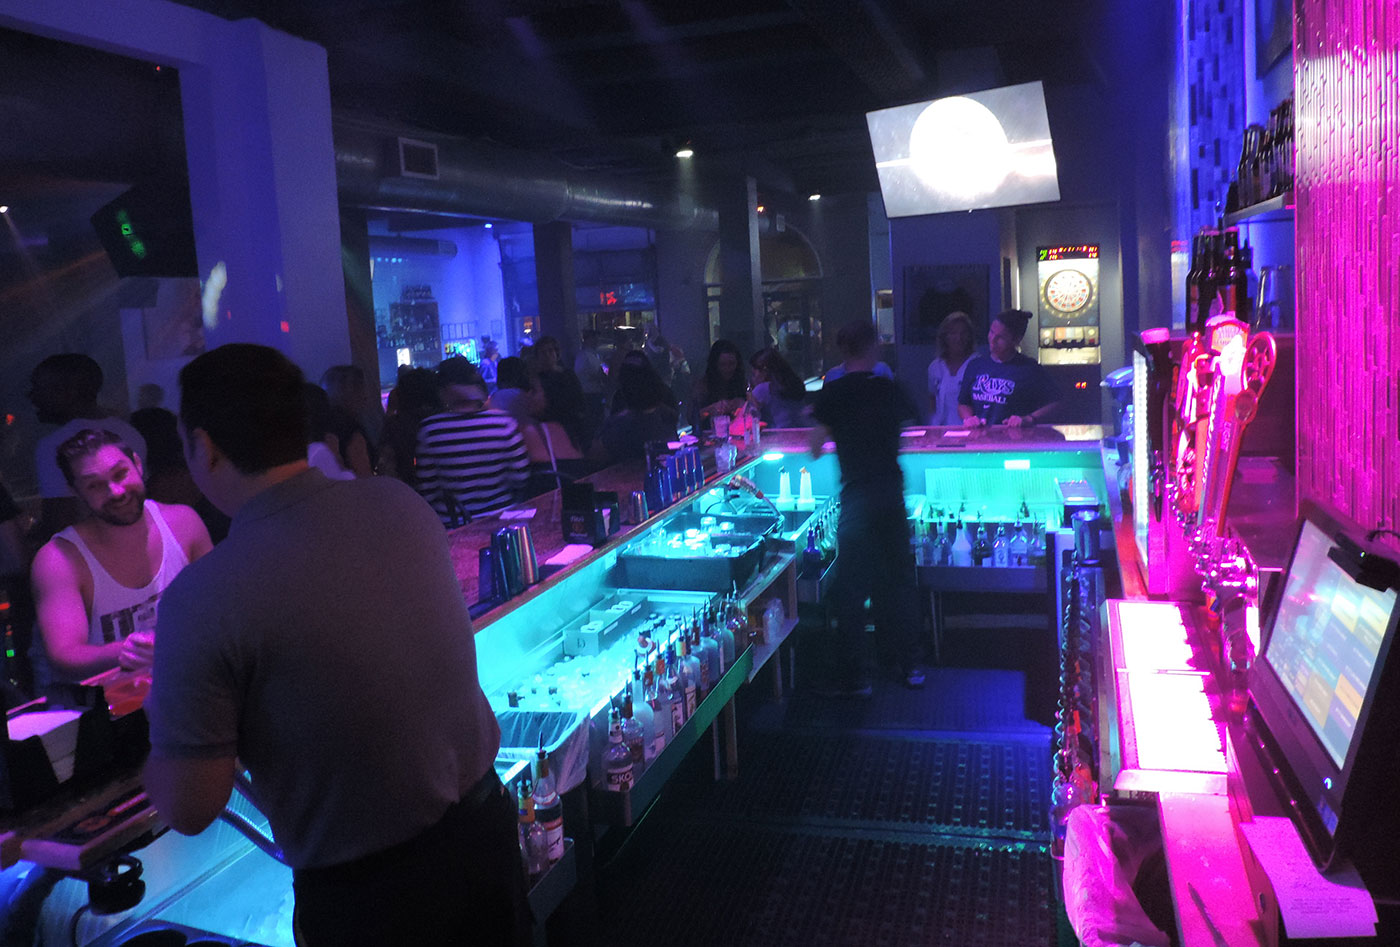 Enigma St Pete - reviews, map, information - Gay Dance club - Travel Gay